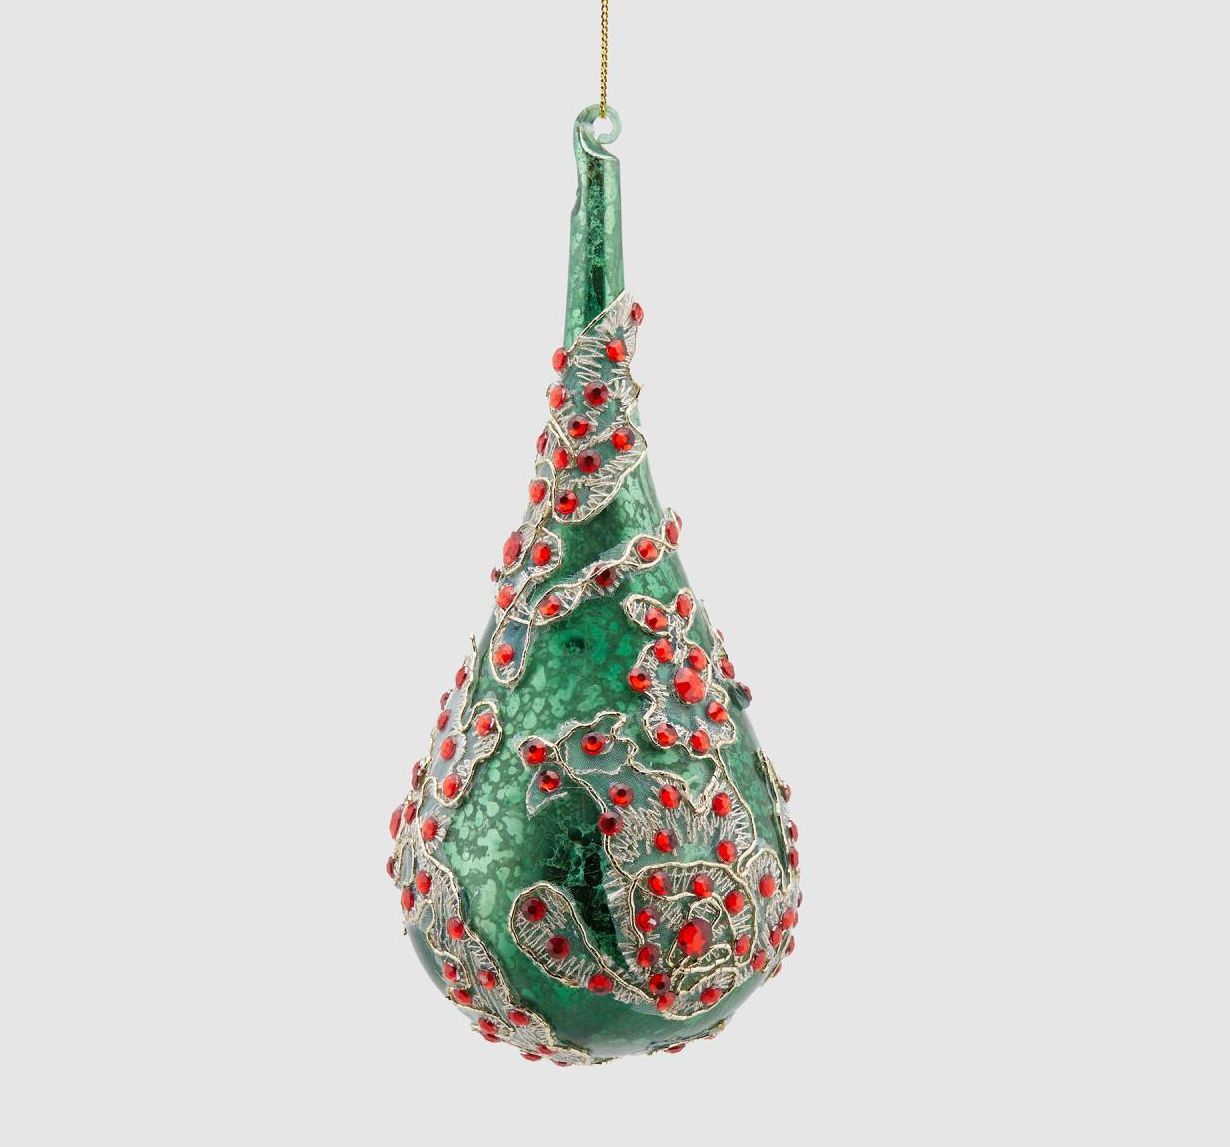 Large Christmas drop in green glass with applied red glitter, 24 cm